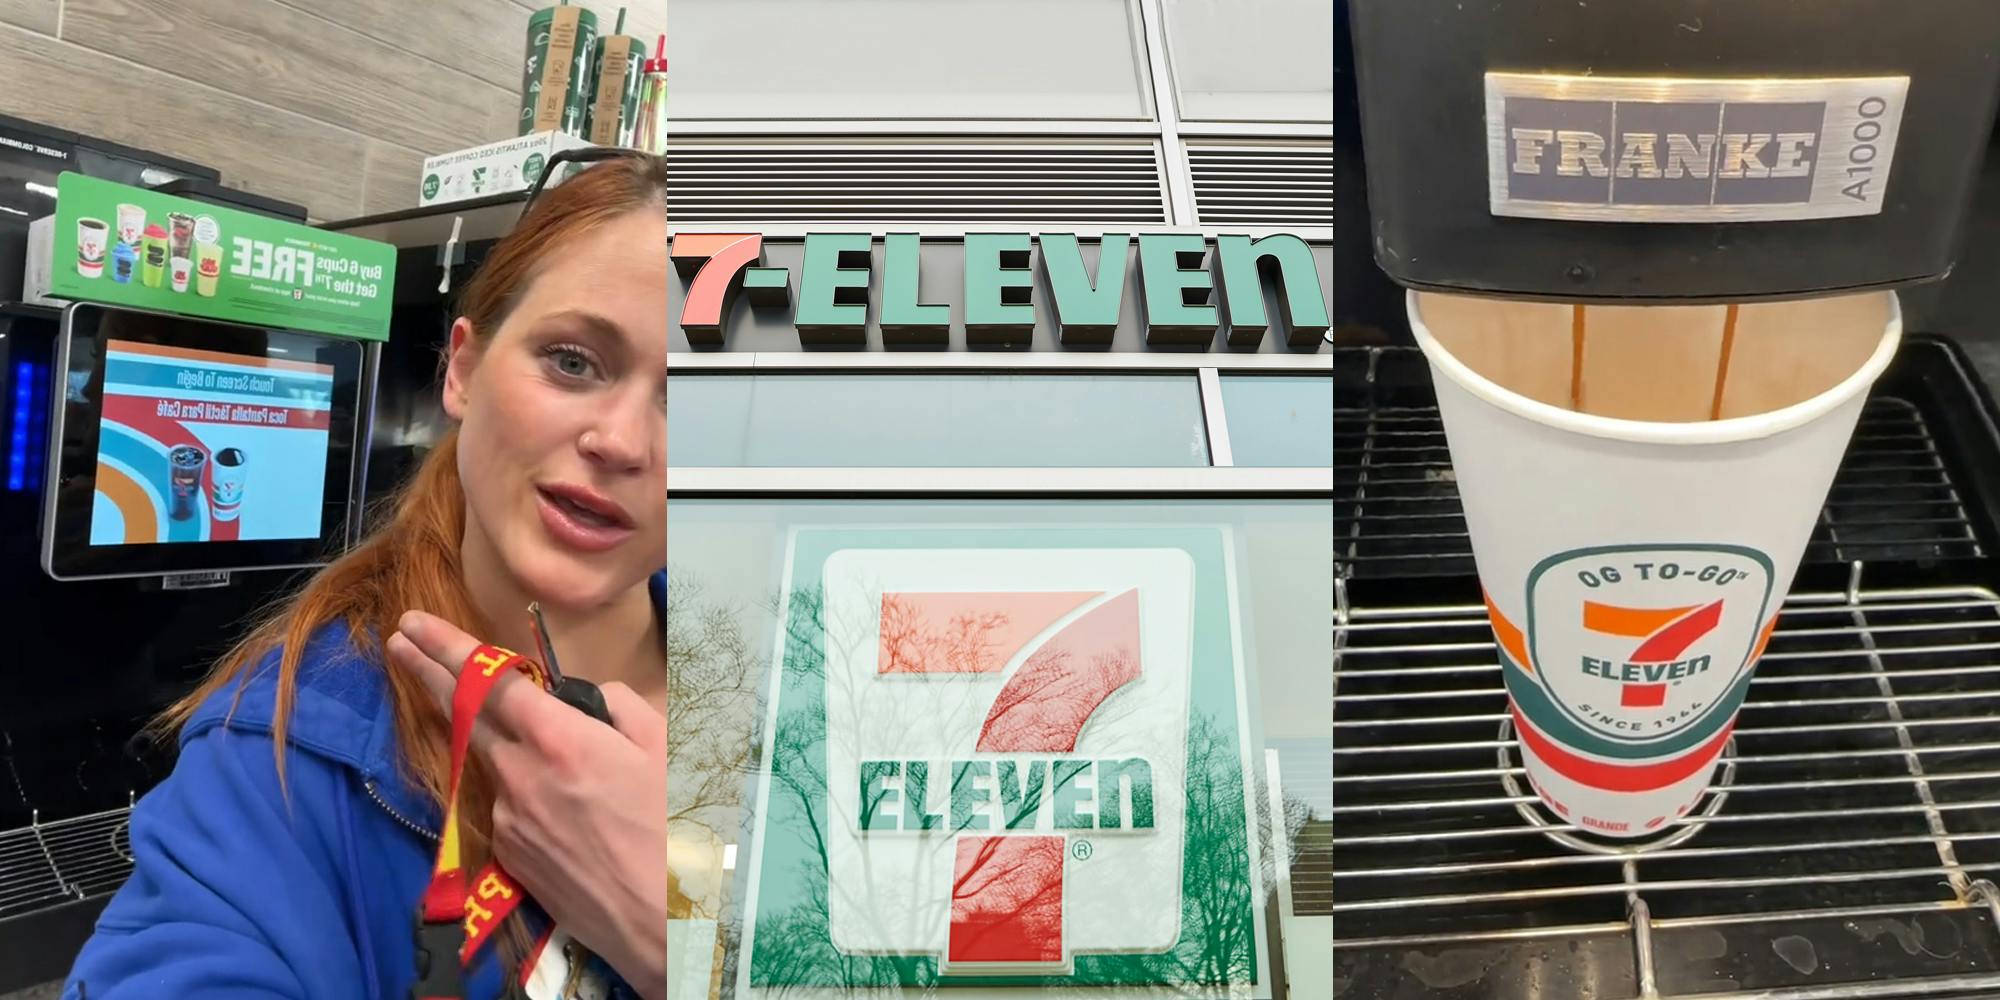 7/11 customer pointing to coffee machine (l) 7/11 signs on windows (c) 7/11 coffee machine pouring coffee into cup (r)